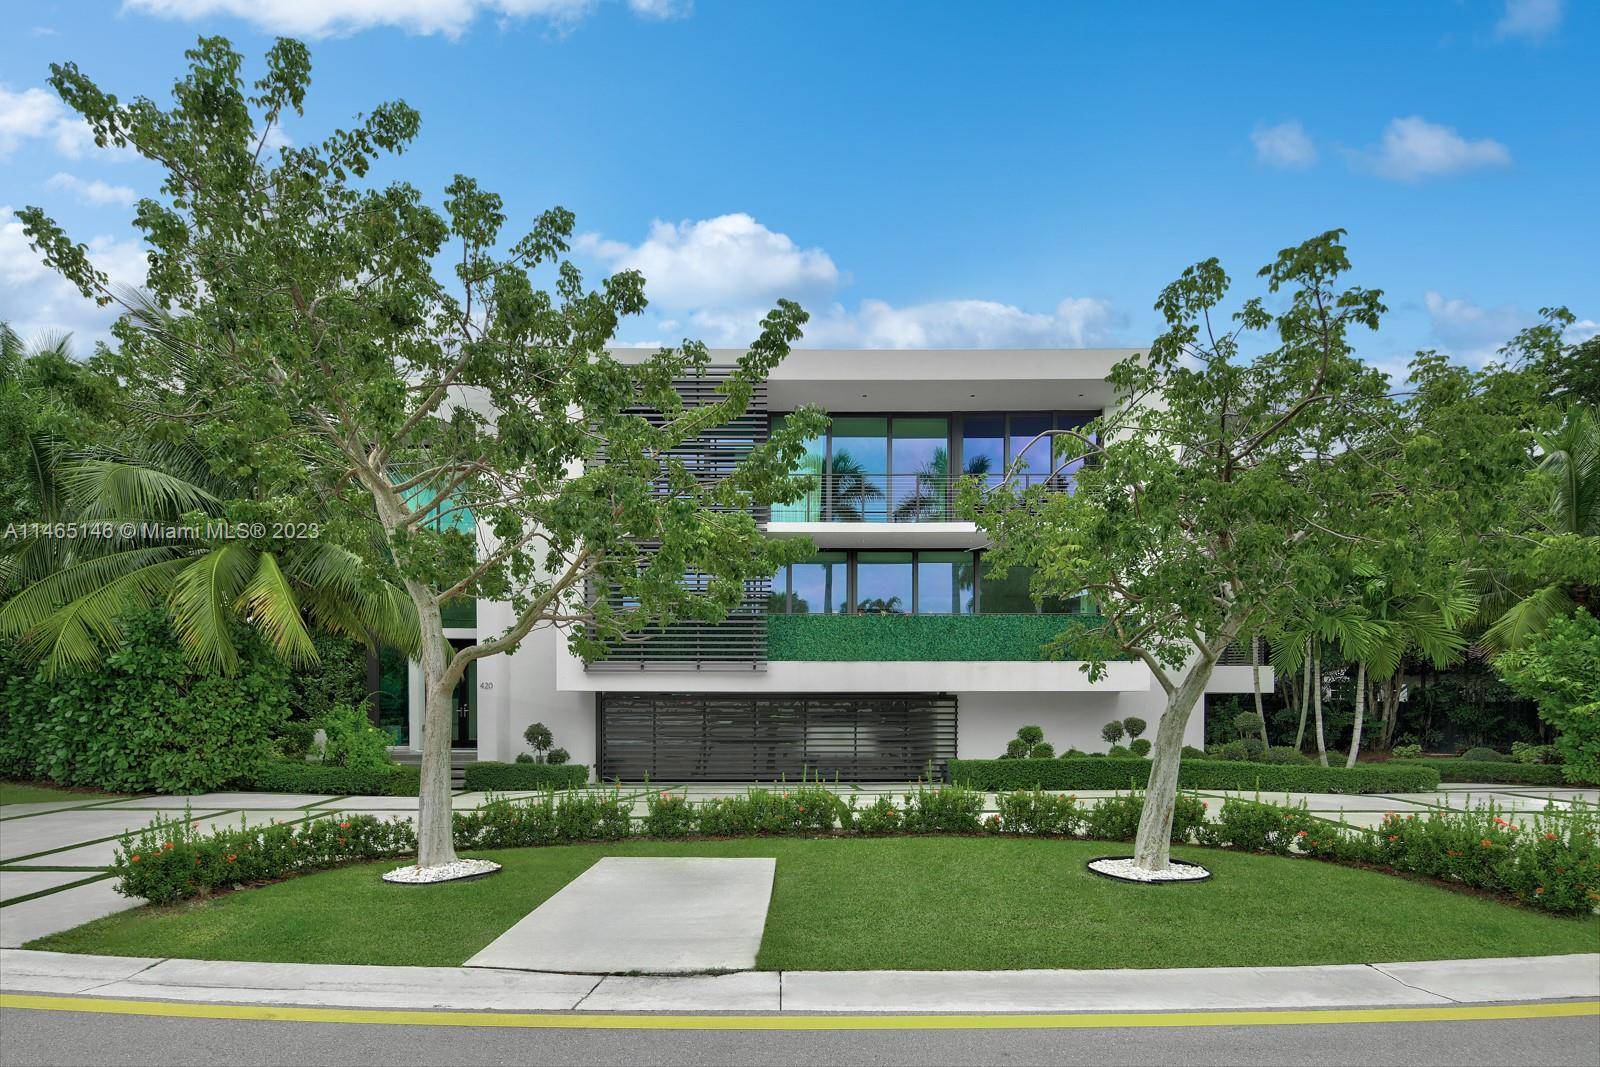 Nestled in the guarded gated, Hibiscus Island, this modern masterpiece, designed by Ralph Choeff is the epitome of Miami Beach lifestyle.